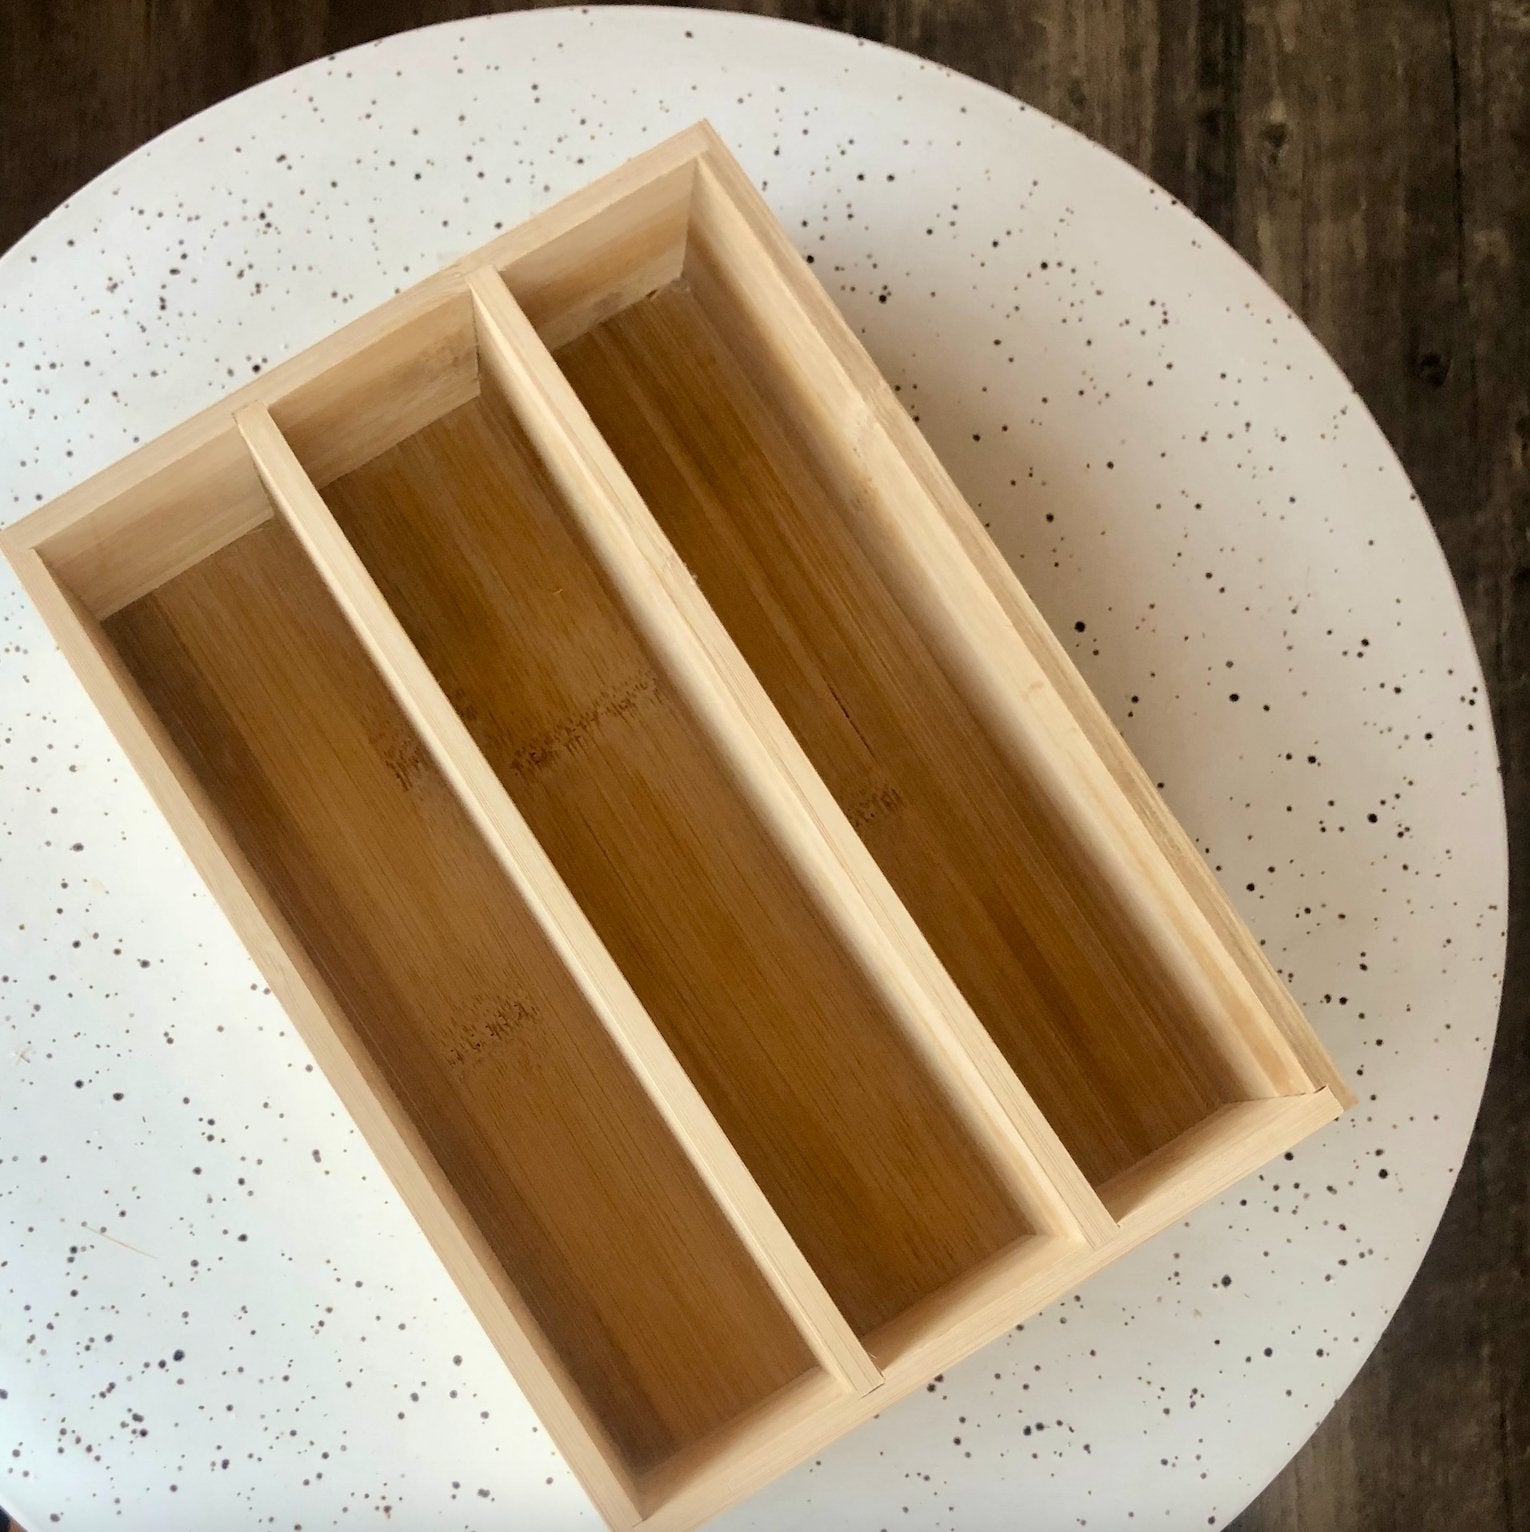 sustainable, zero waste, earth-friendly, plastic-free Bamboo Cutlery Set in Drawer Organizer - Bamboo Switch